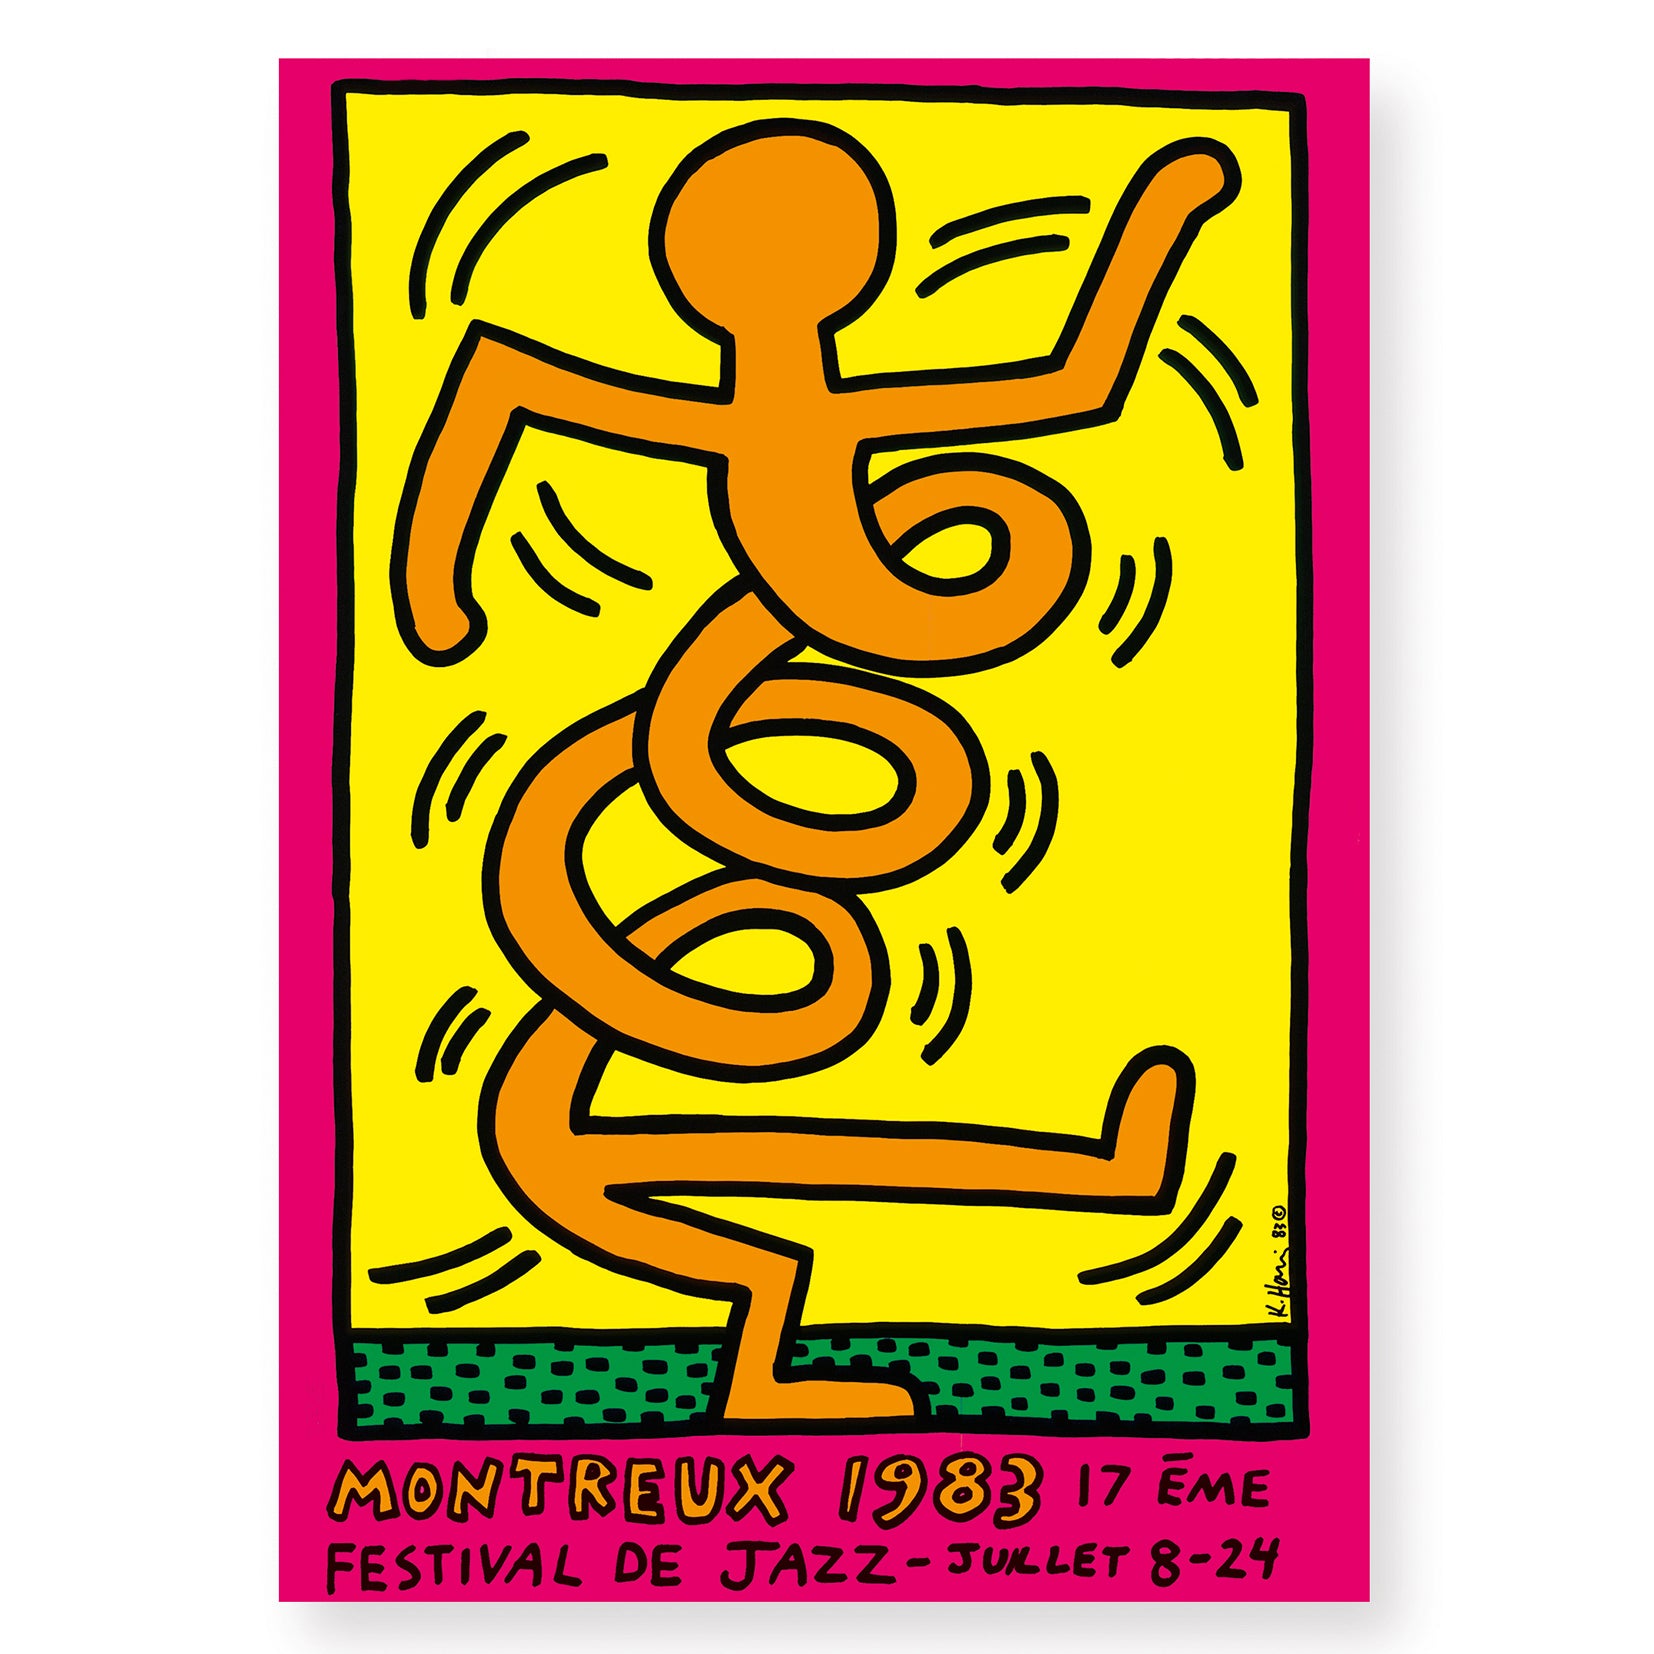 Keith Haring, Montreux Jazz Festival Orange Print | Keith Haring Prints For Sale, Buy Keith Haring art prints, Keith Haring artwork.  Artwork in pop art style featuring twisting man. Colours are pink, green, orange and yellow. Montreux Jazz Festival Poster